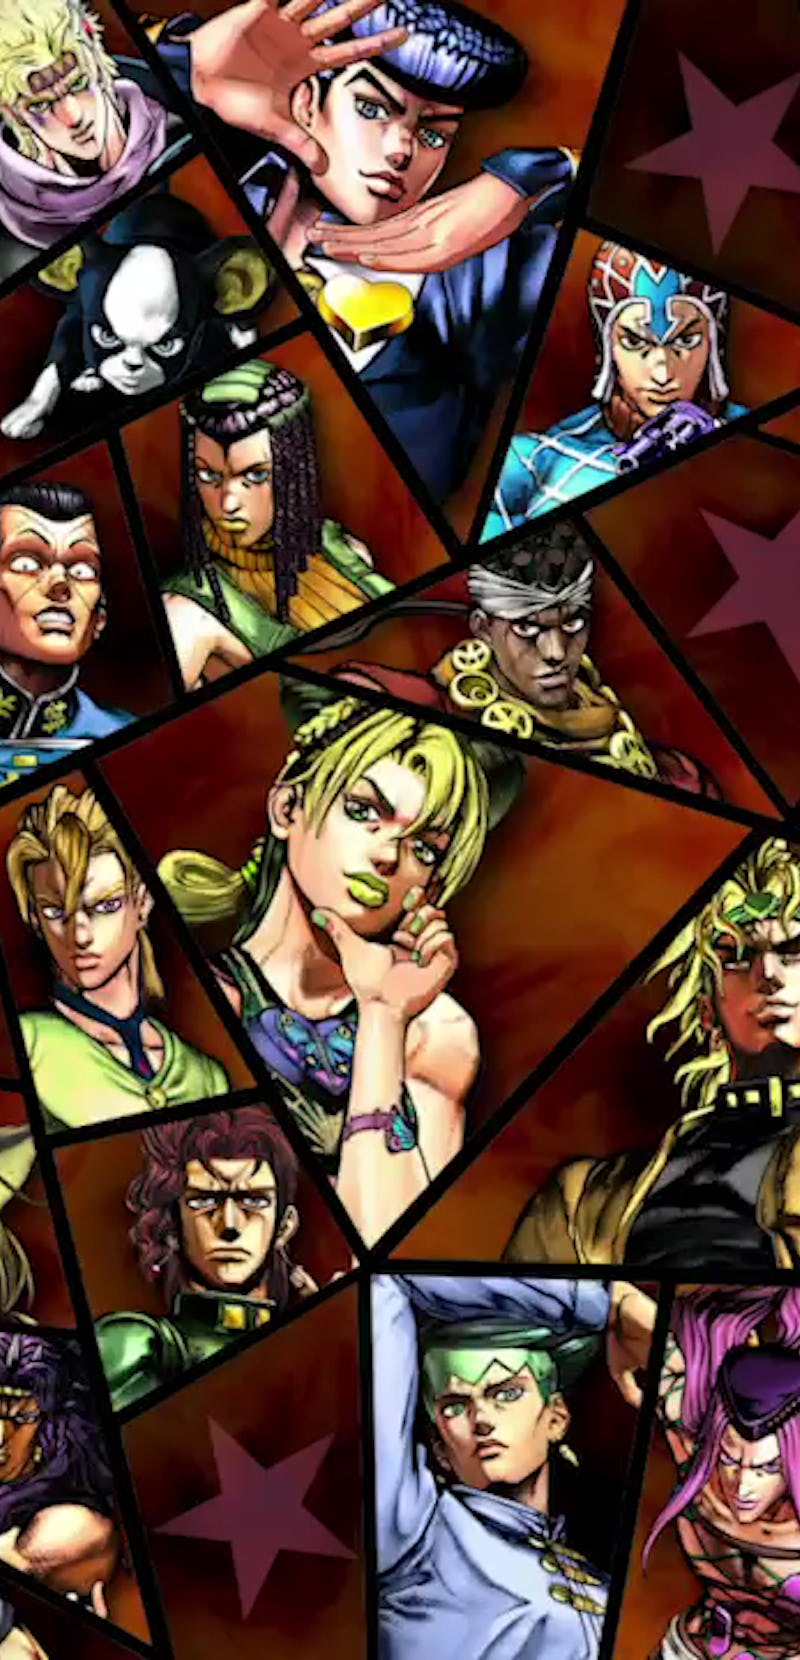 A collage of all the characters from JoJo's Bizarre Adventure: All Star Battle R